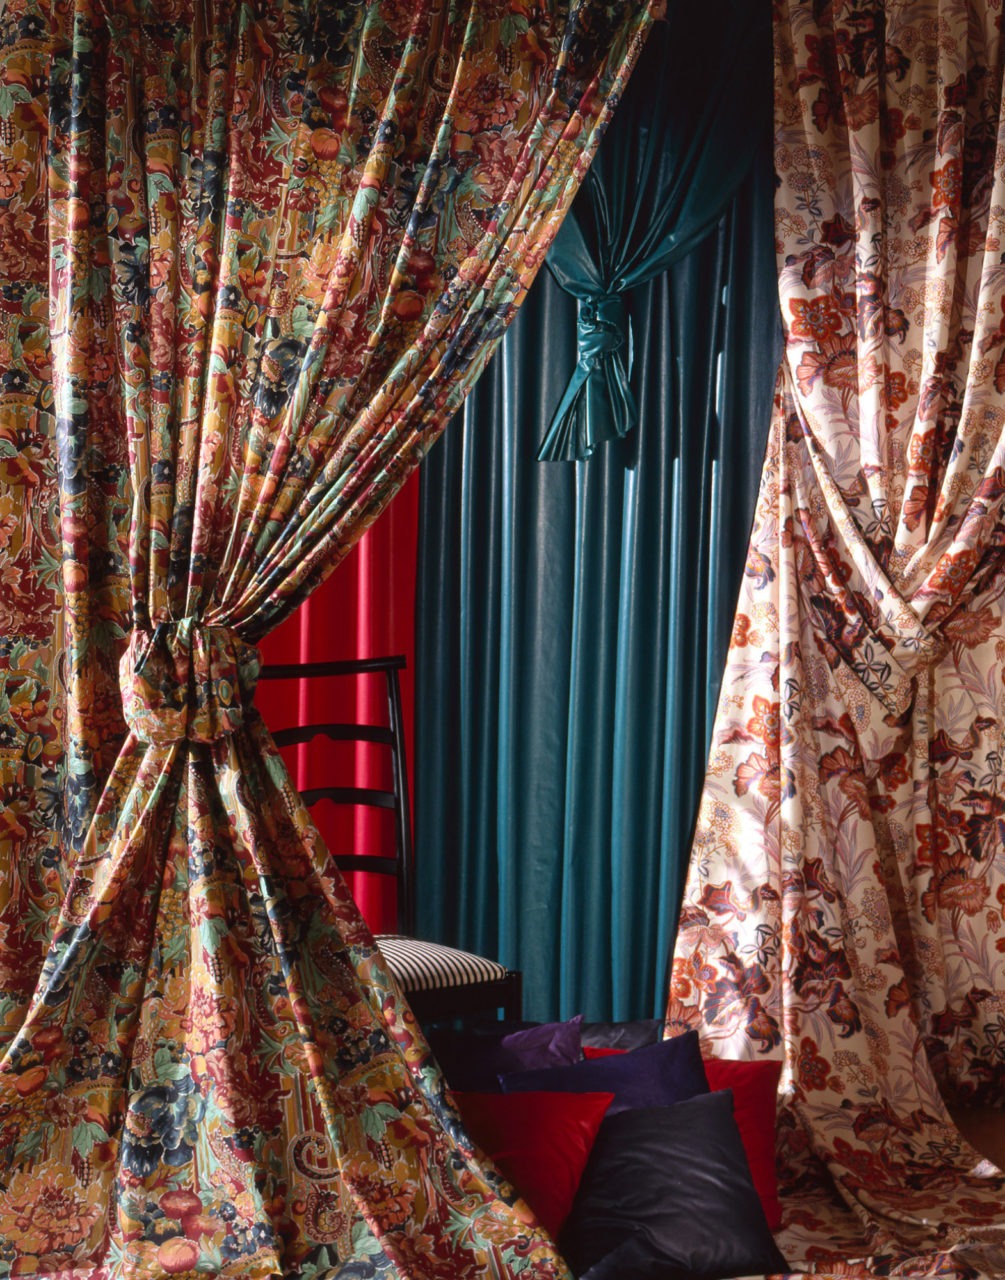 Room with curtains and roller blind in multicolored floral pattern, leather armchair.